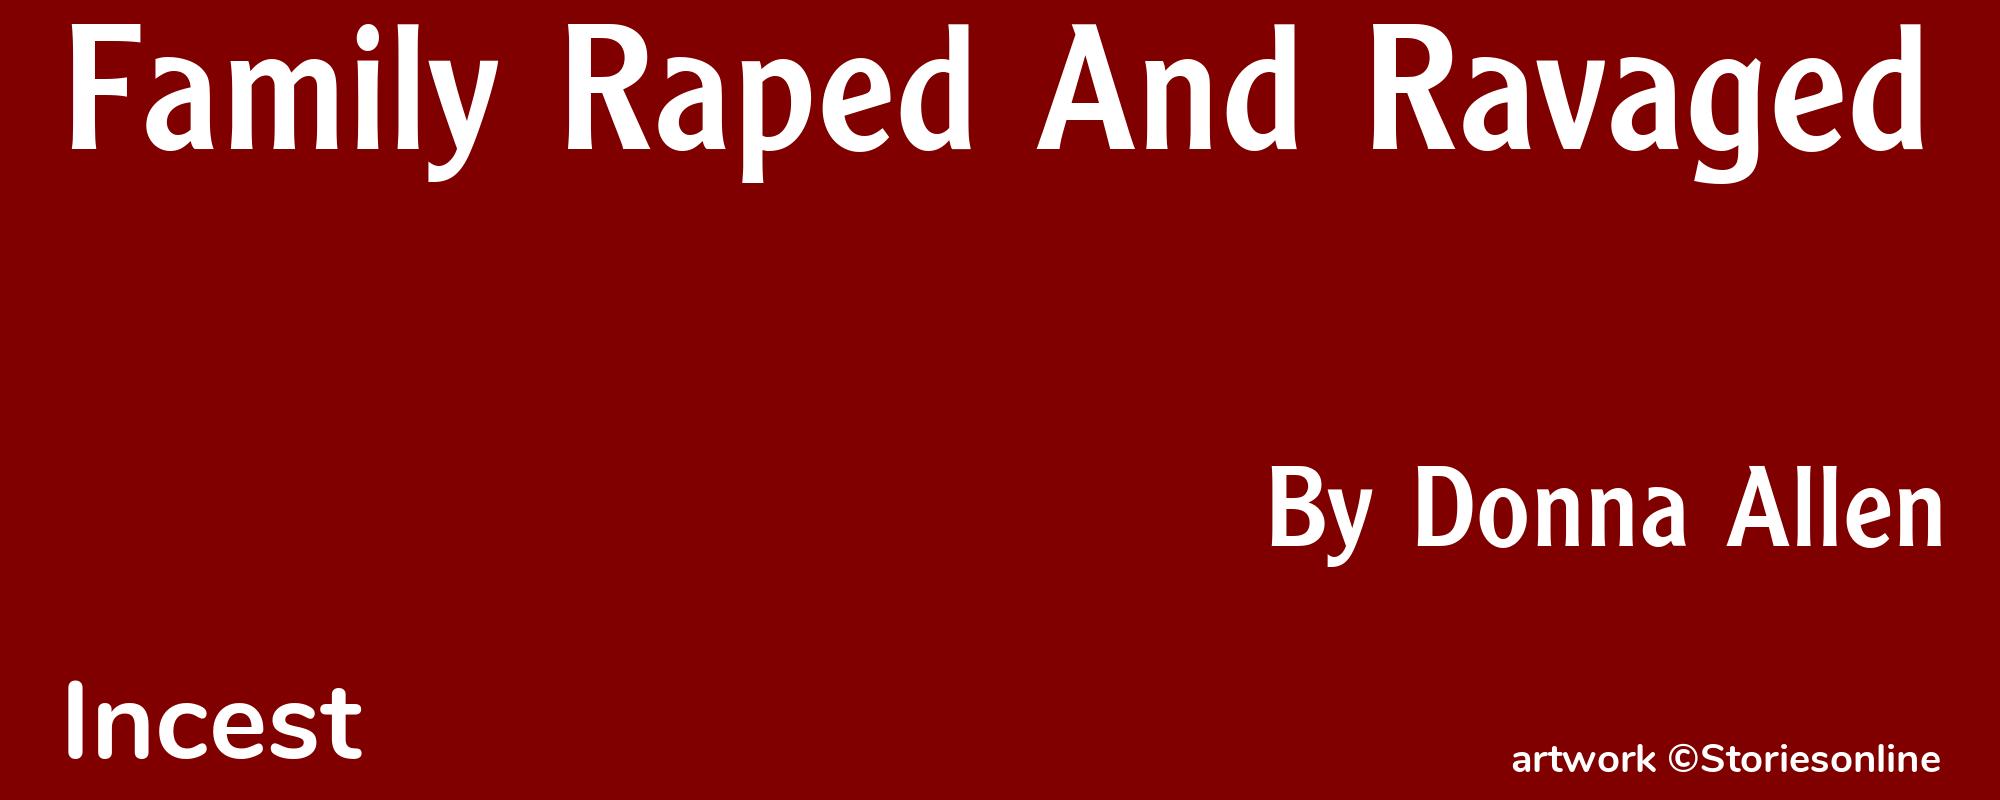 Family Raped And Ravaged - Cover